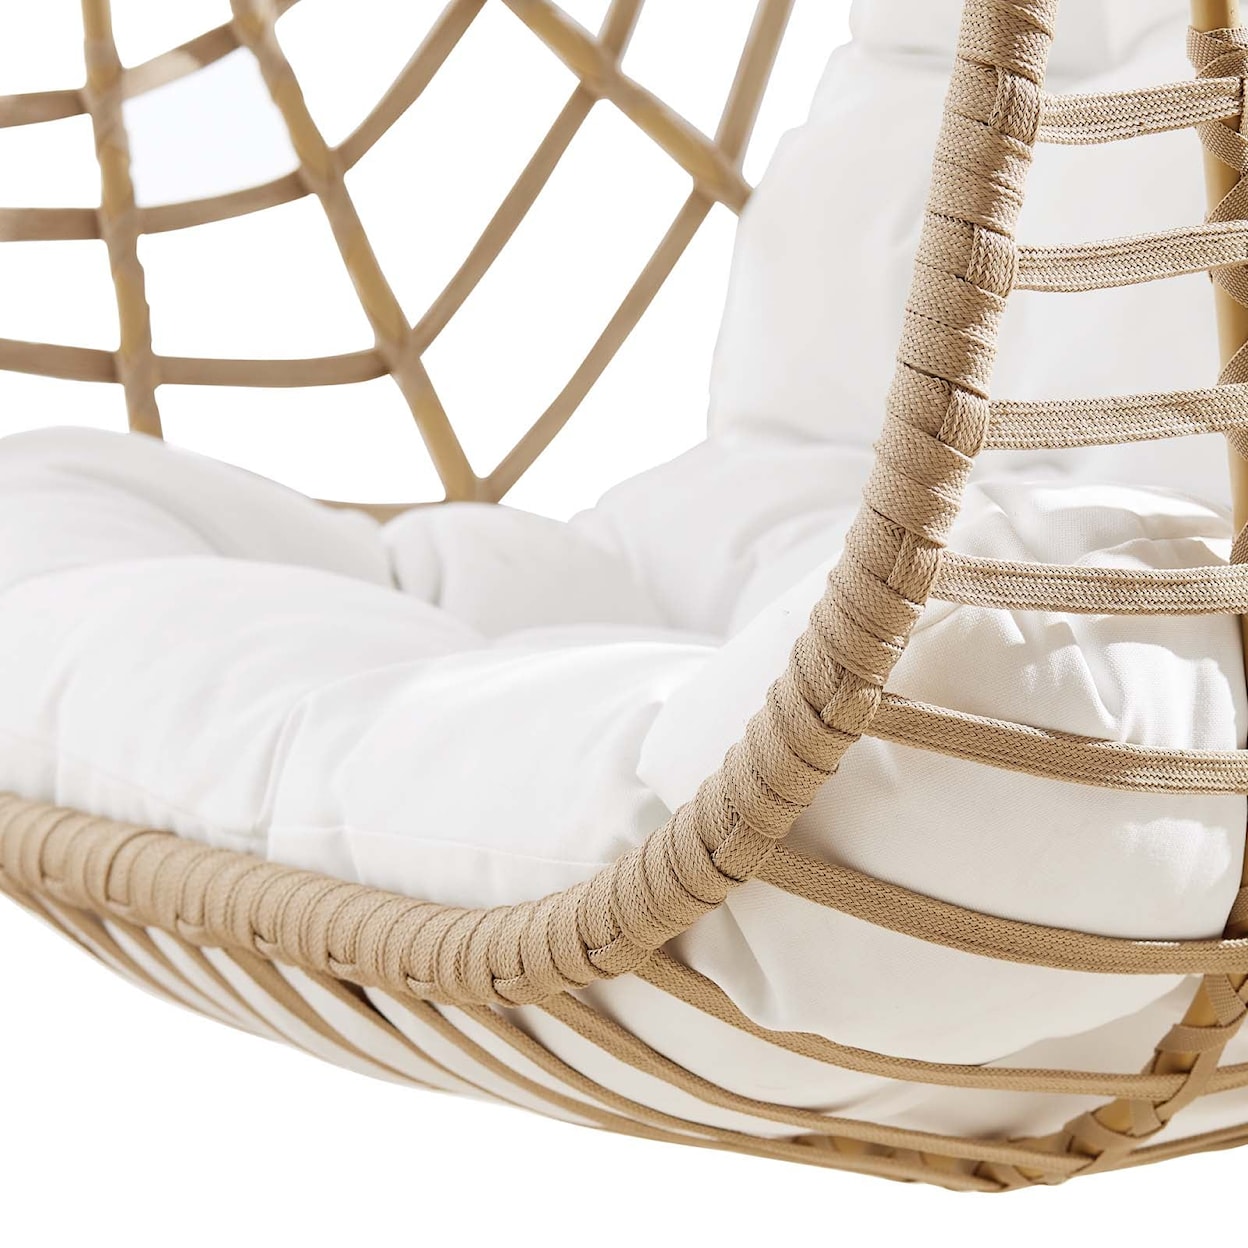 Modway Amalie Outdoor Patio Hanging Swing Chair